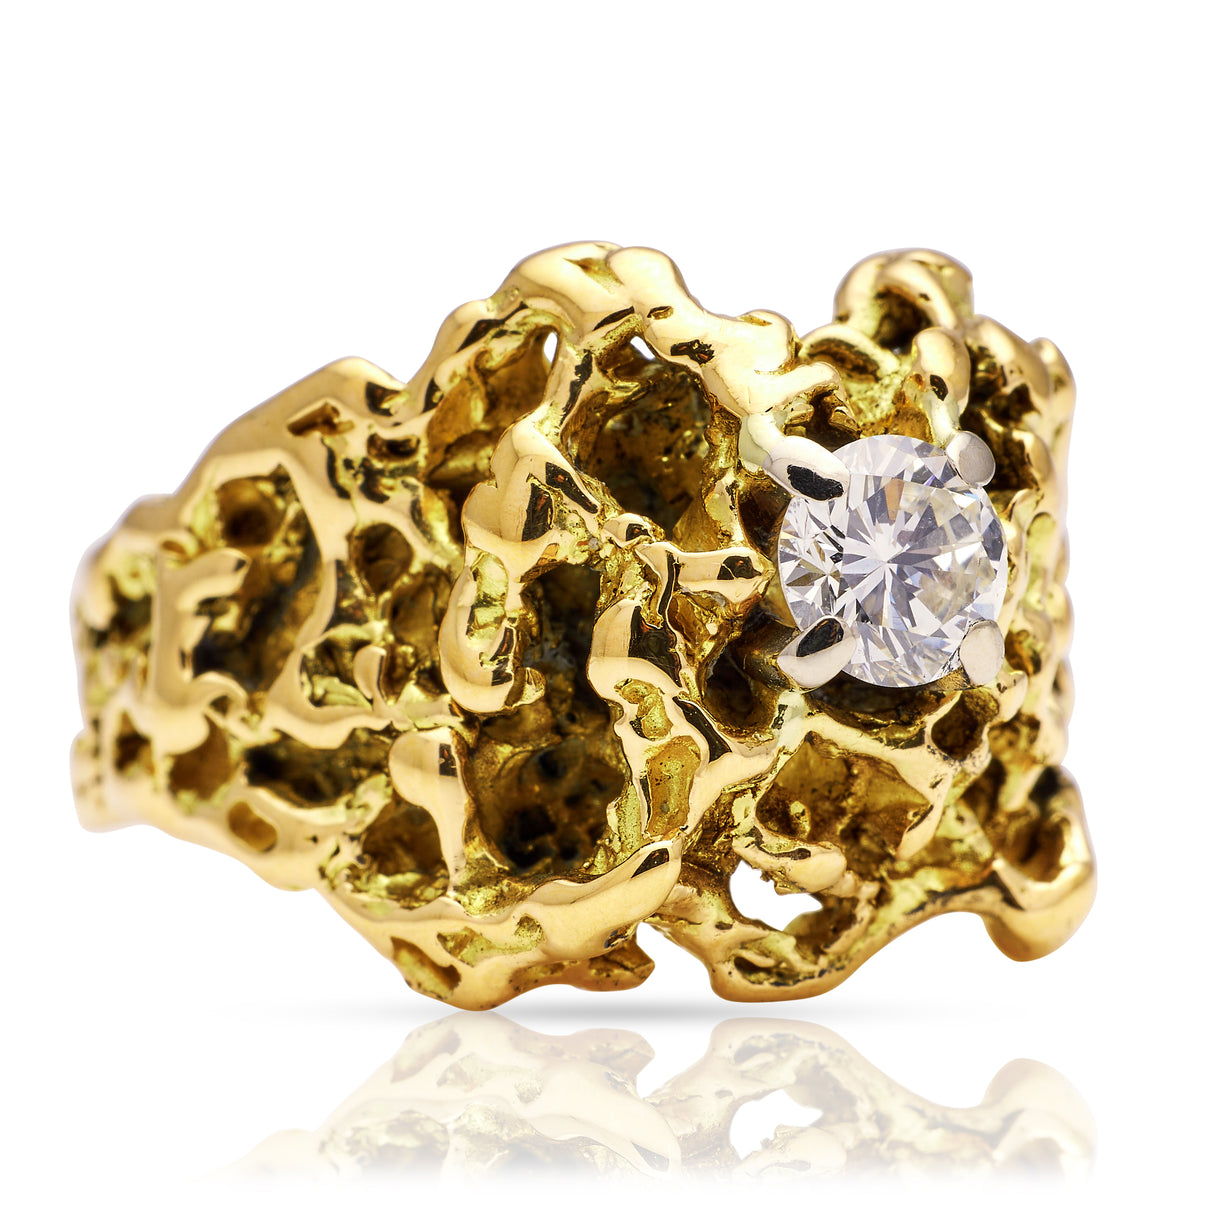 Vintage textured 18ct yellow gold nugget diamond ring, side view. 